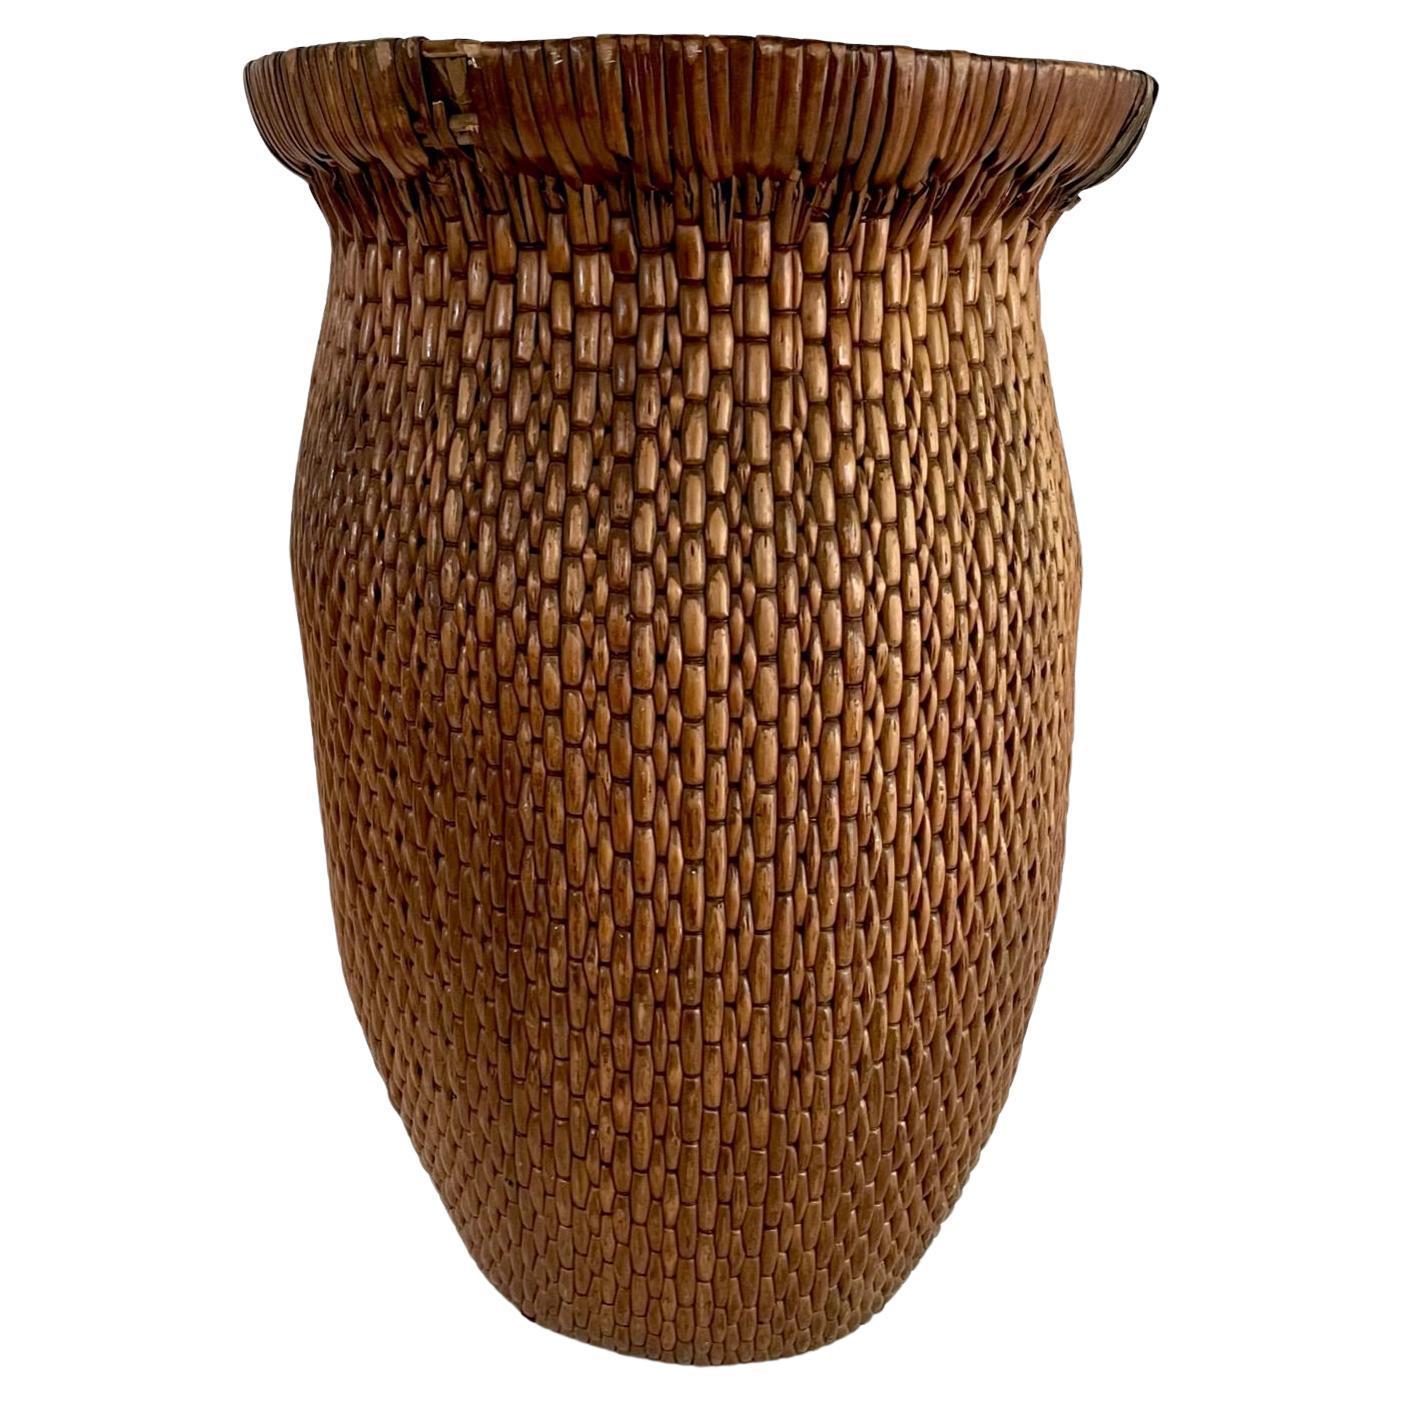 Early 20th Century Chinese Willow Basket For Sale